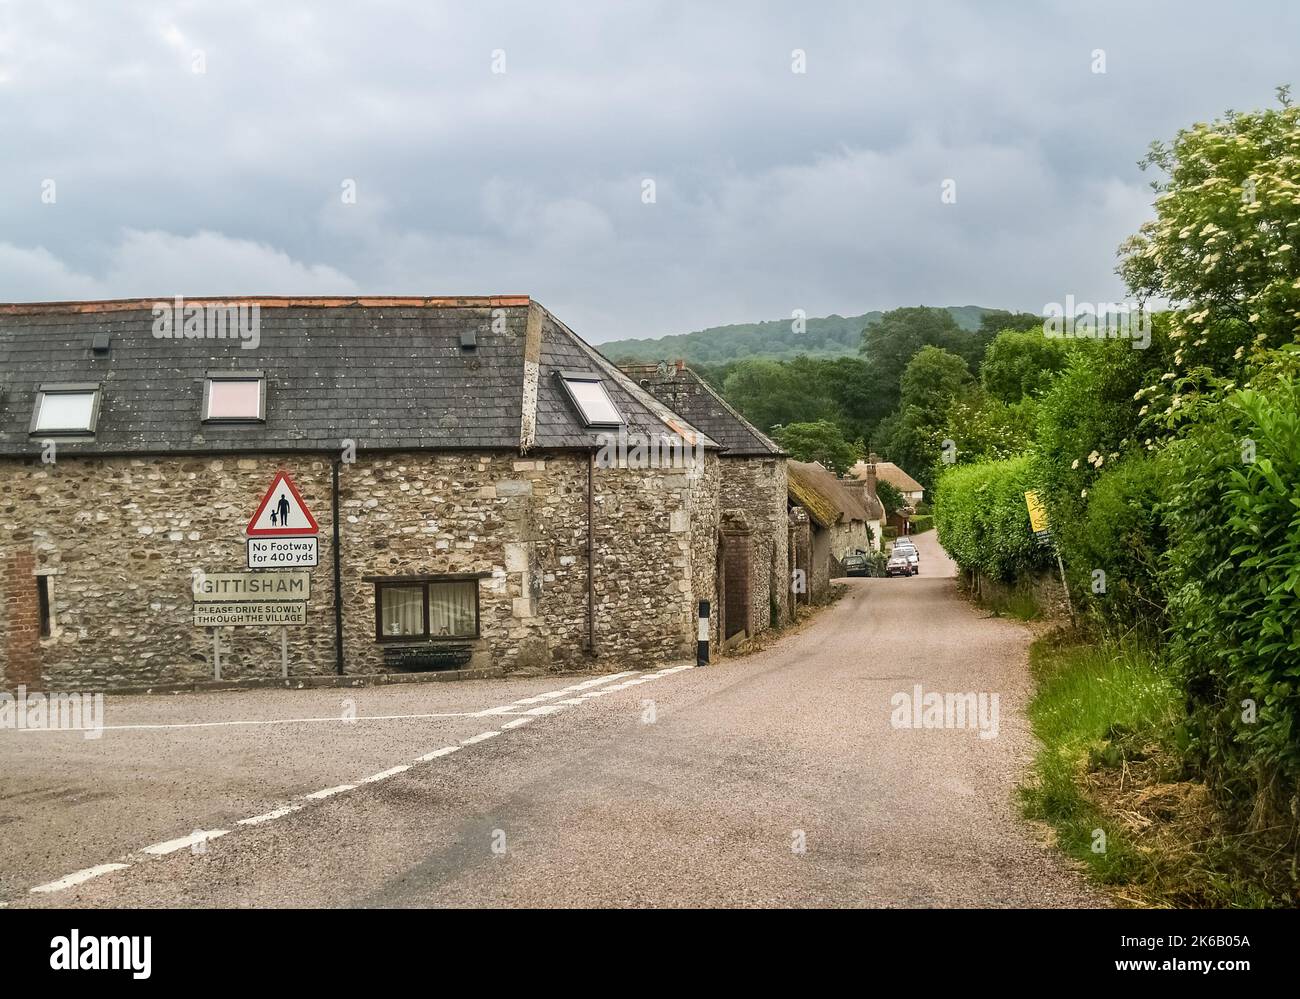 Gittisham United Kingdom - June 17 2009; Editorial- Country road into small English town with stone and. slate buildings. Stock Photo